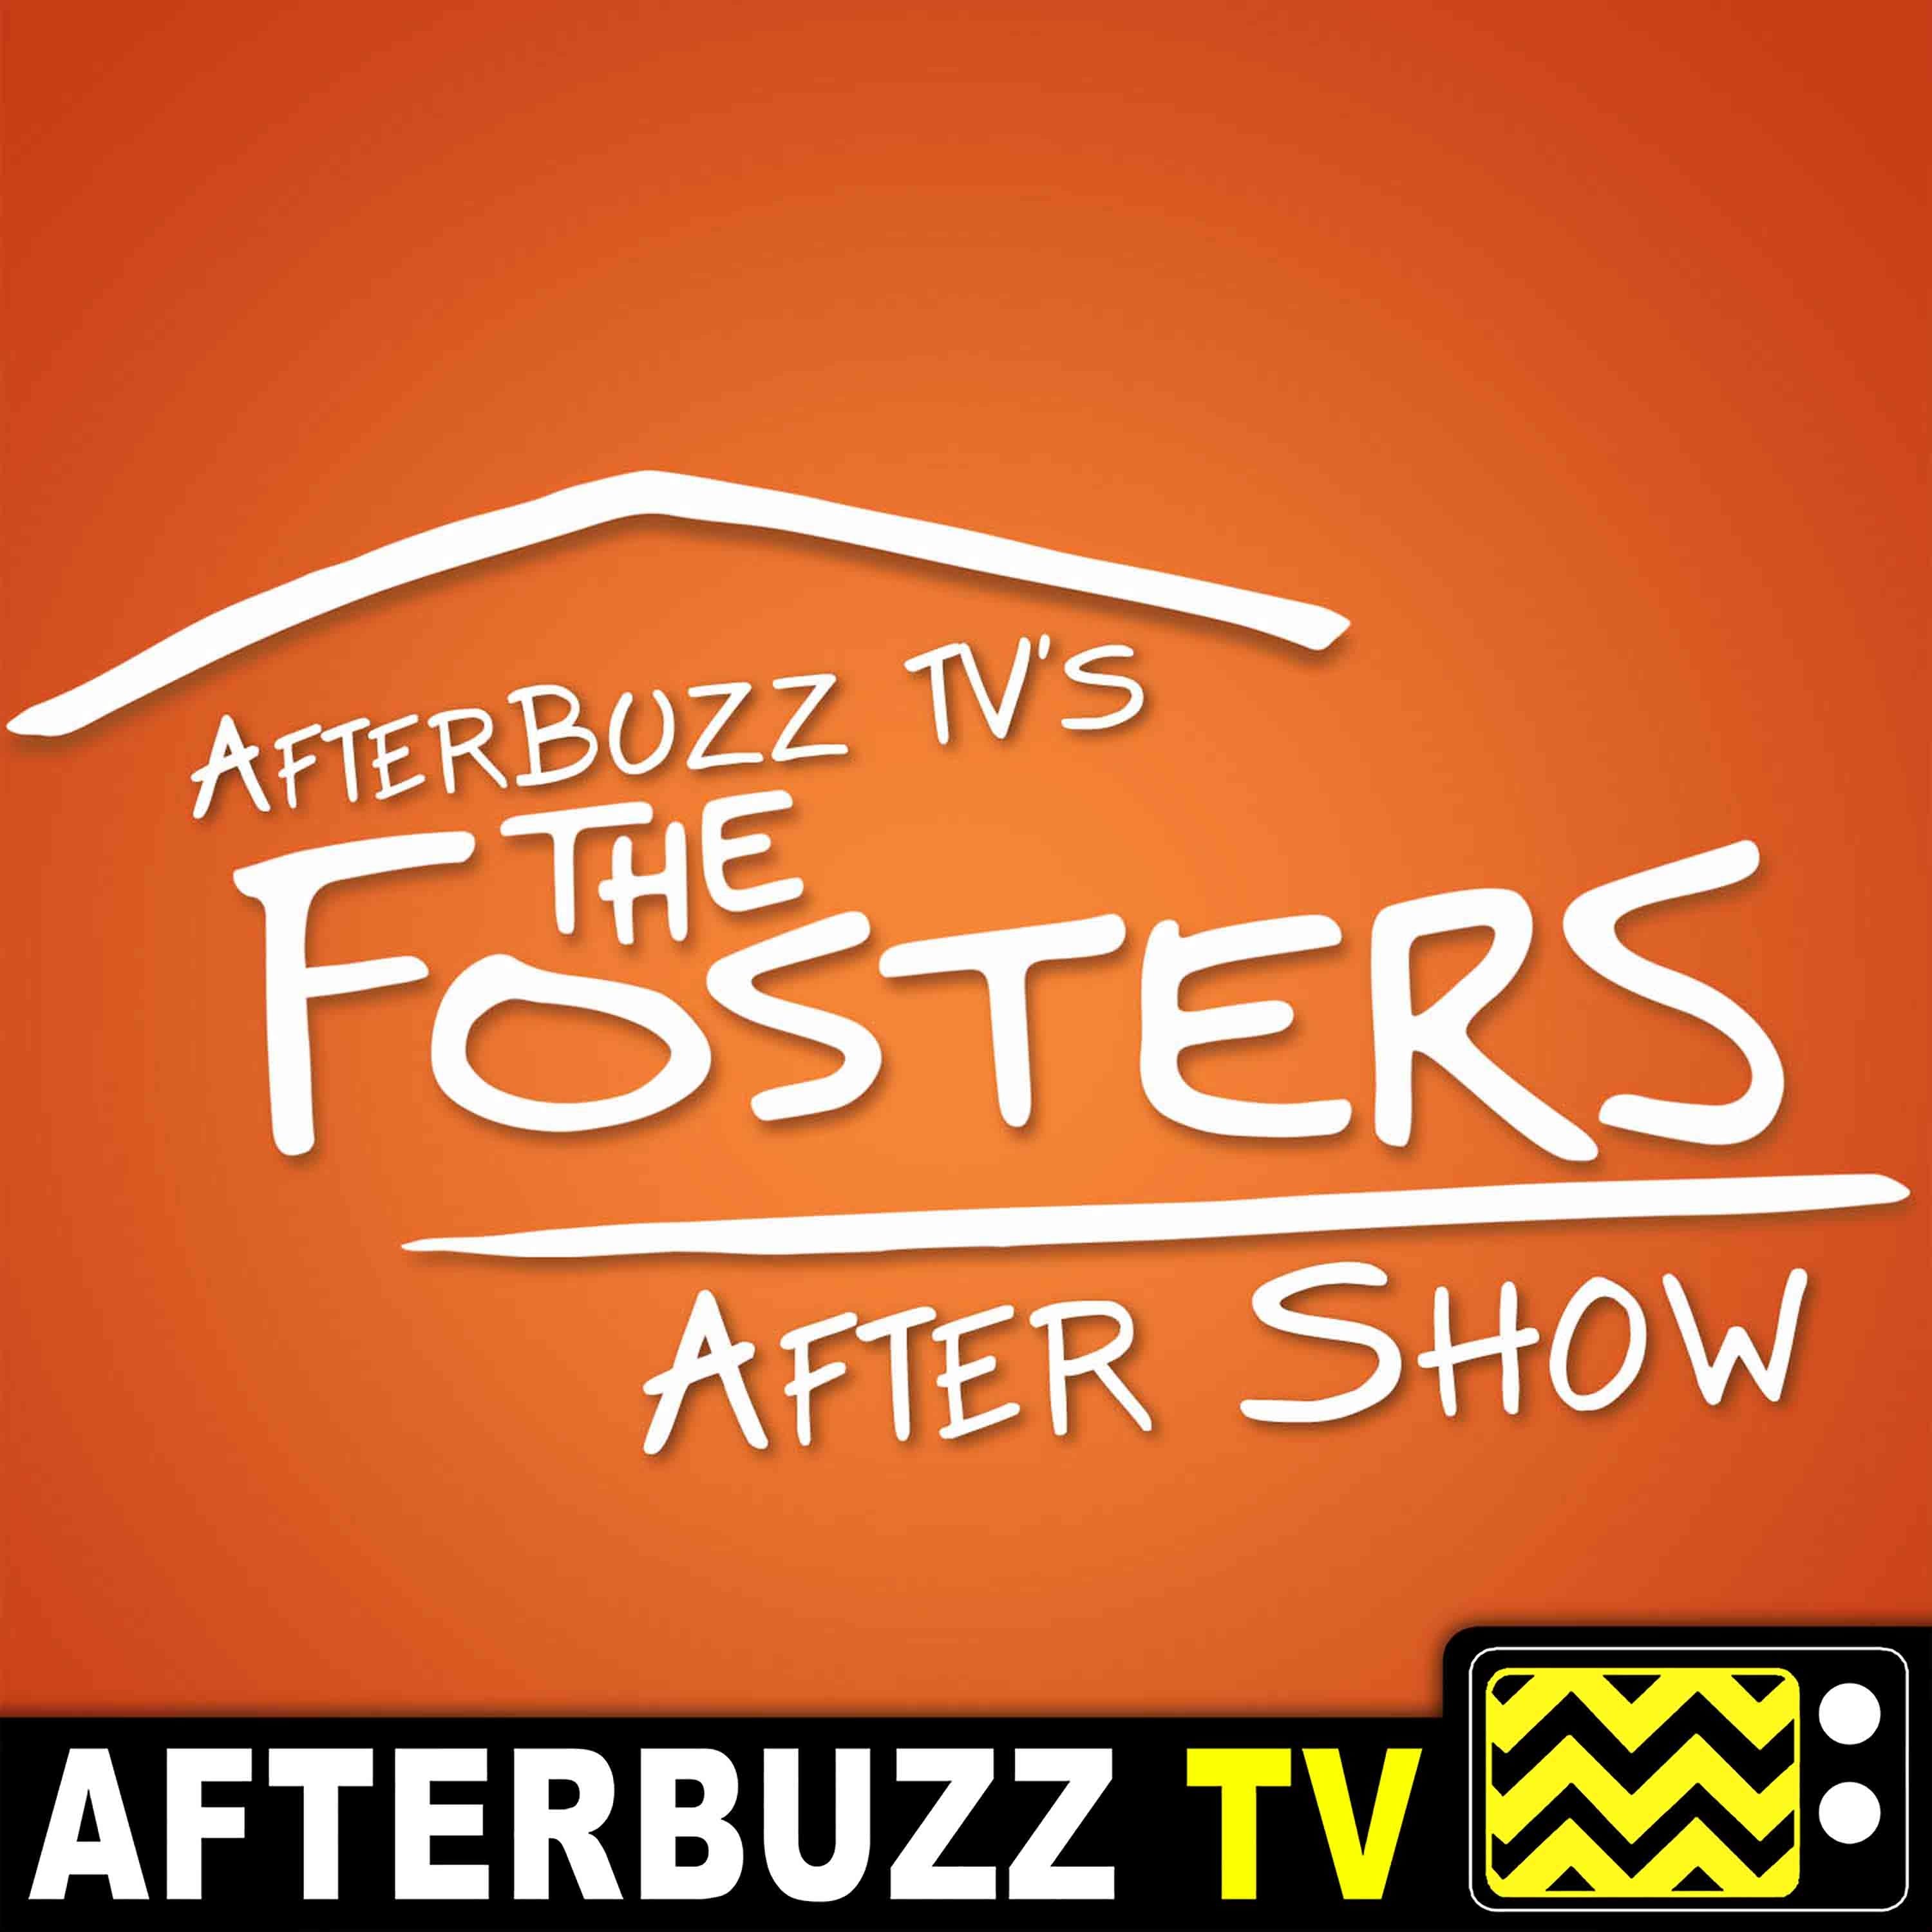 The Fosters S:2 | Caitlin Carver Guests on Play E:3 | AfterBuzz TV AfterShow